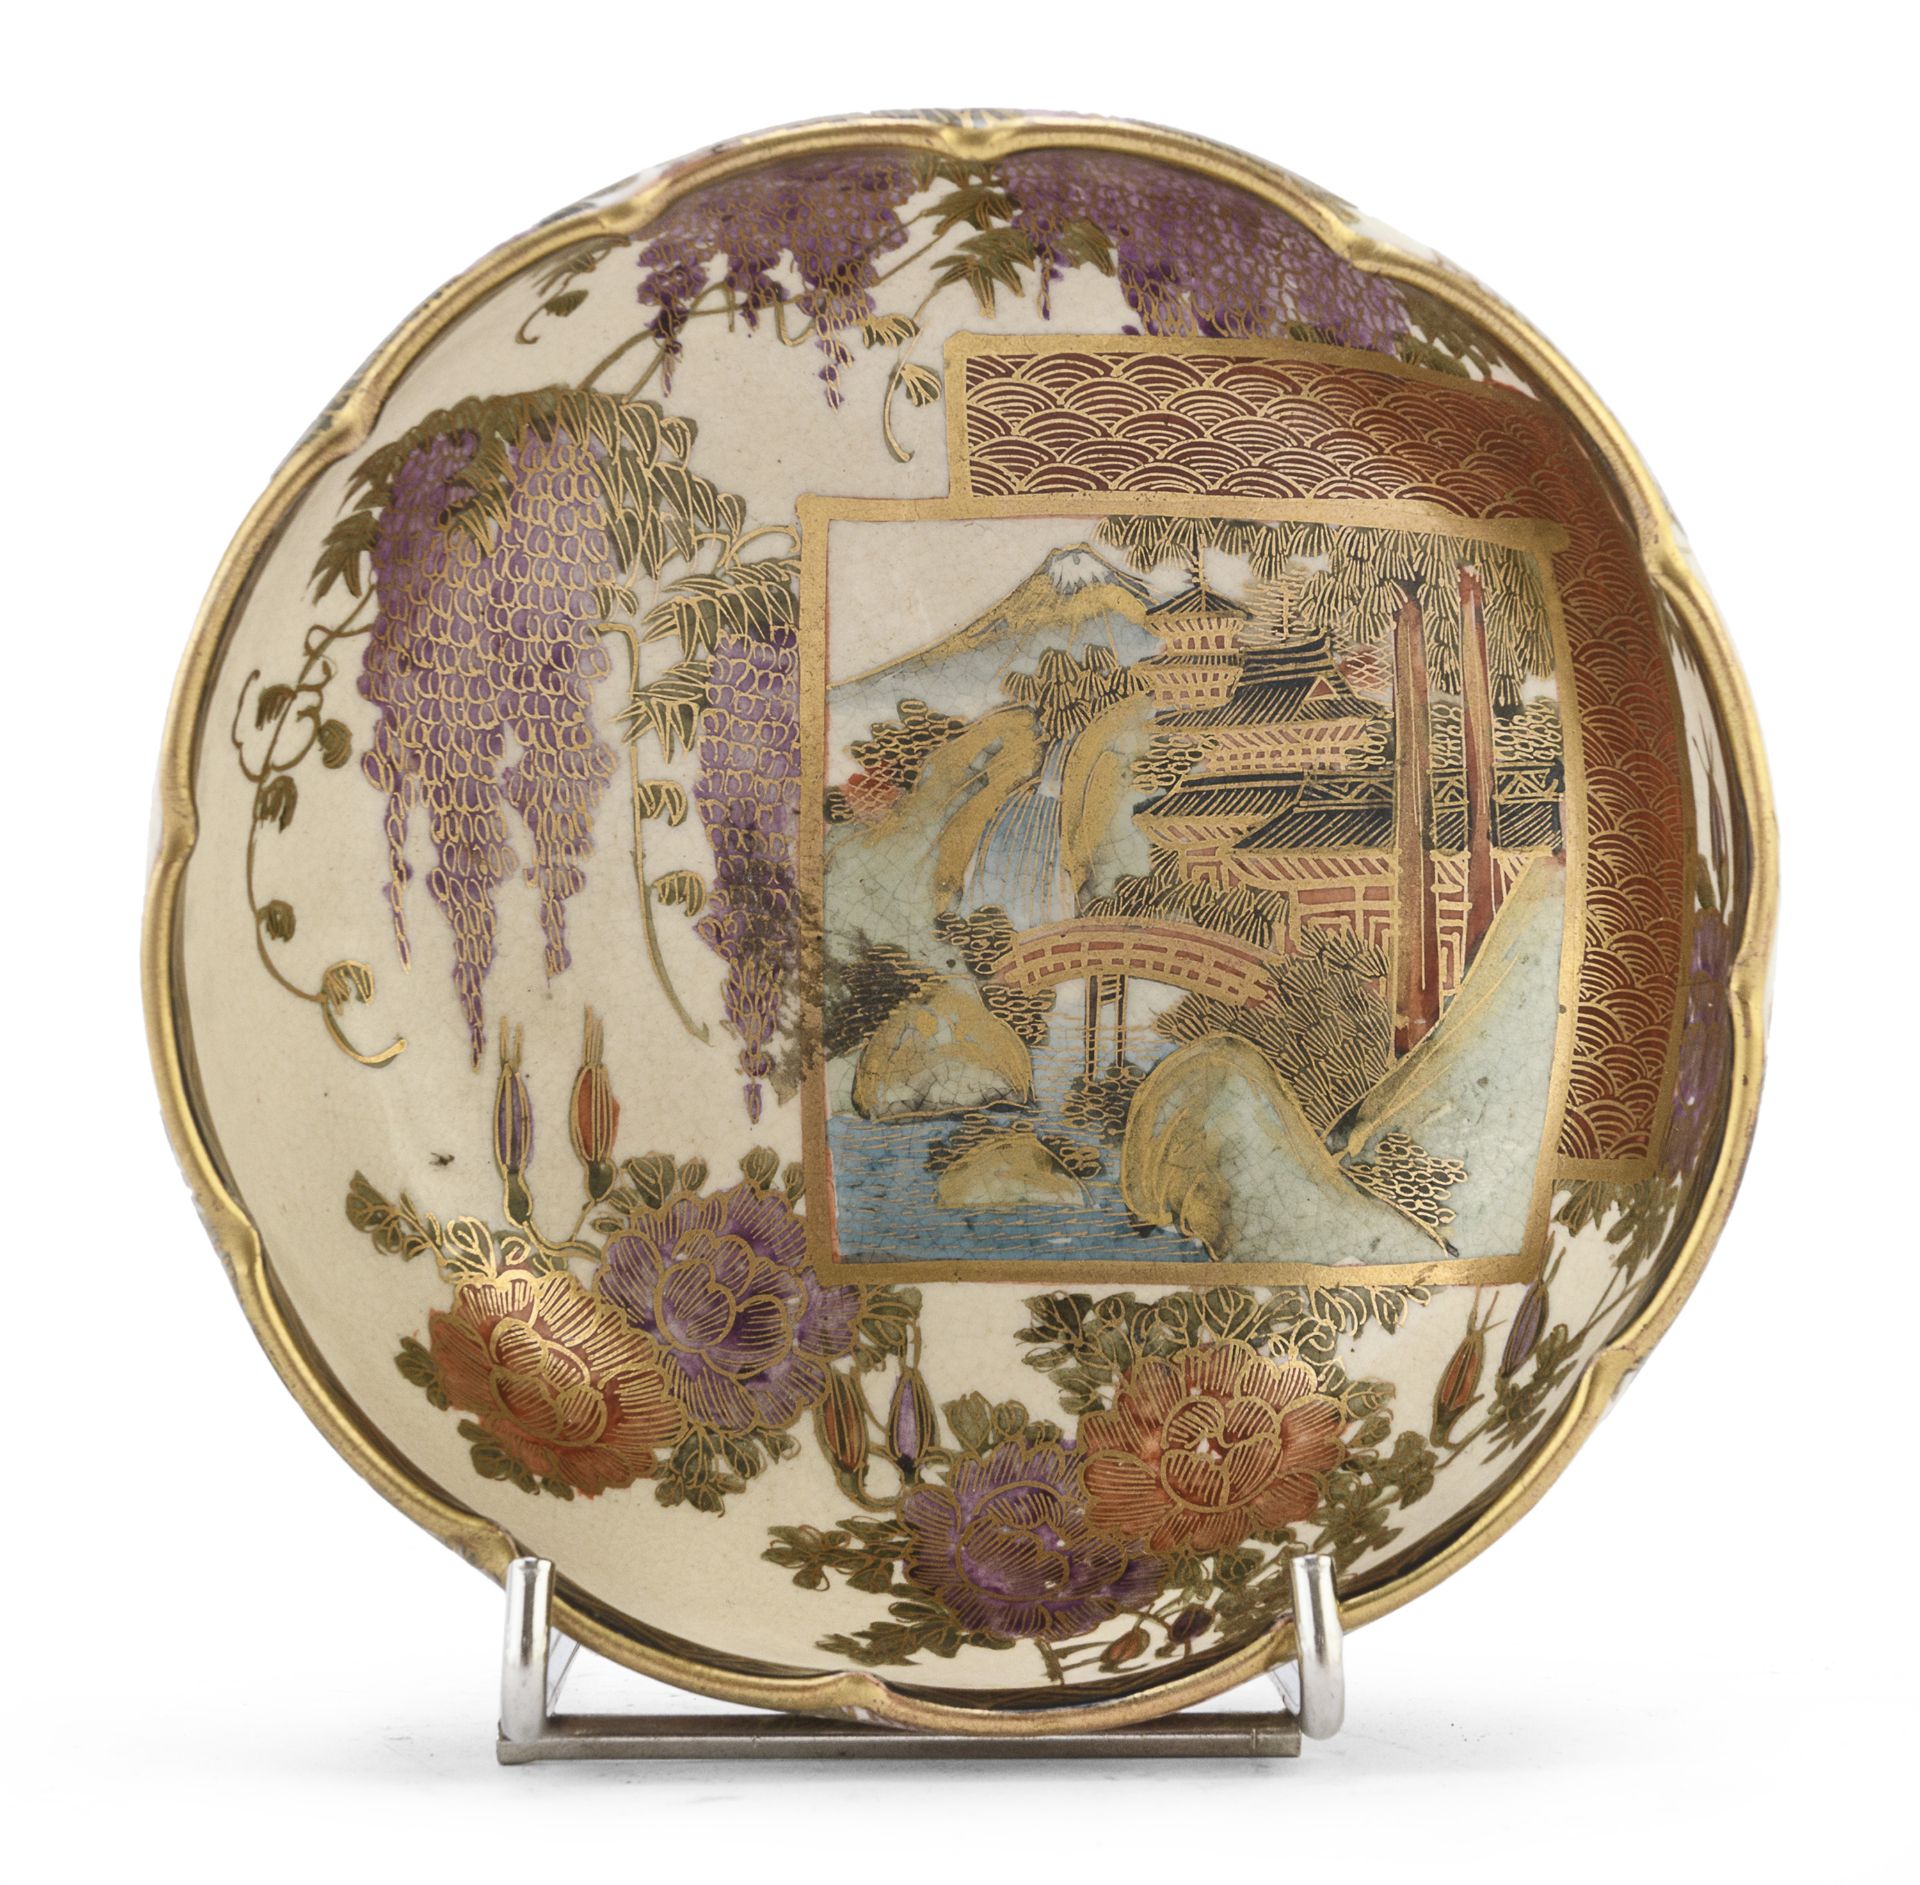 A SMALL JAPANESE POLYCHROME AND GOLD ENAMELED SATSUMA CERAMIC BOWL LATE 19TH EARLY 20TH CENTURY.